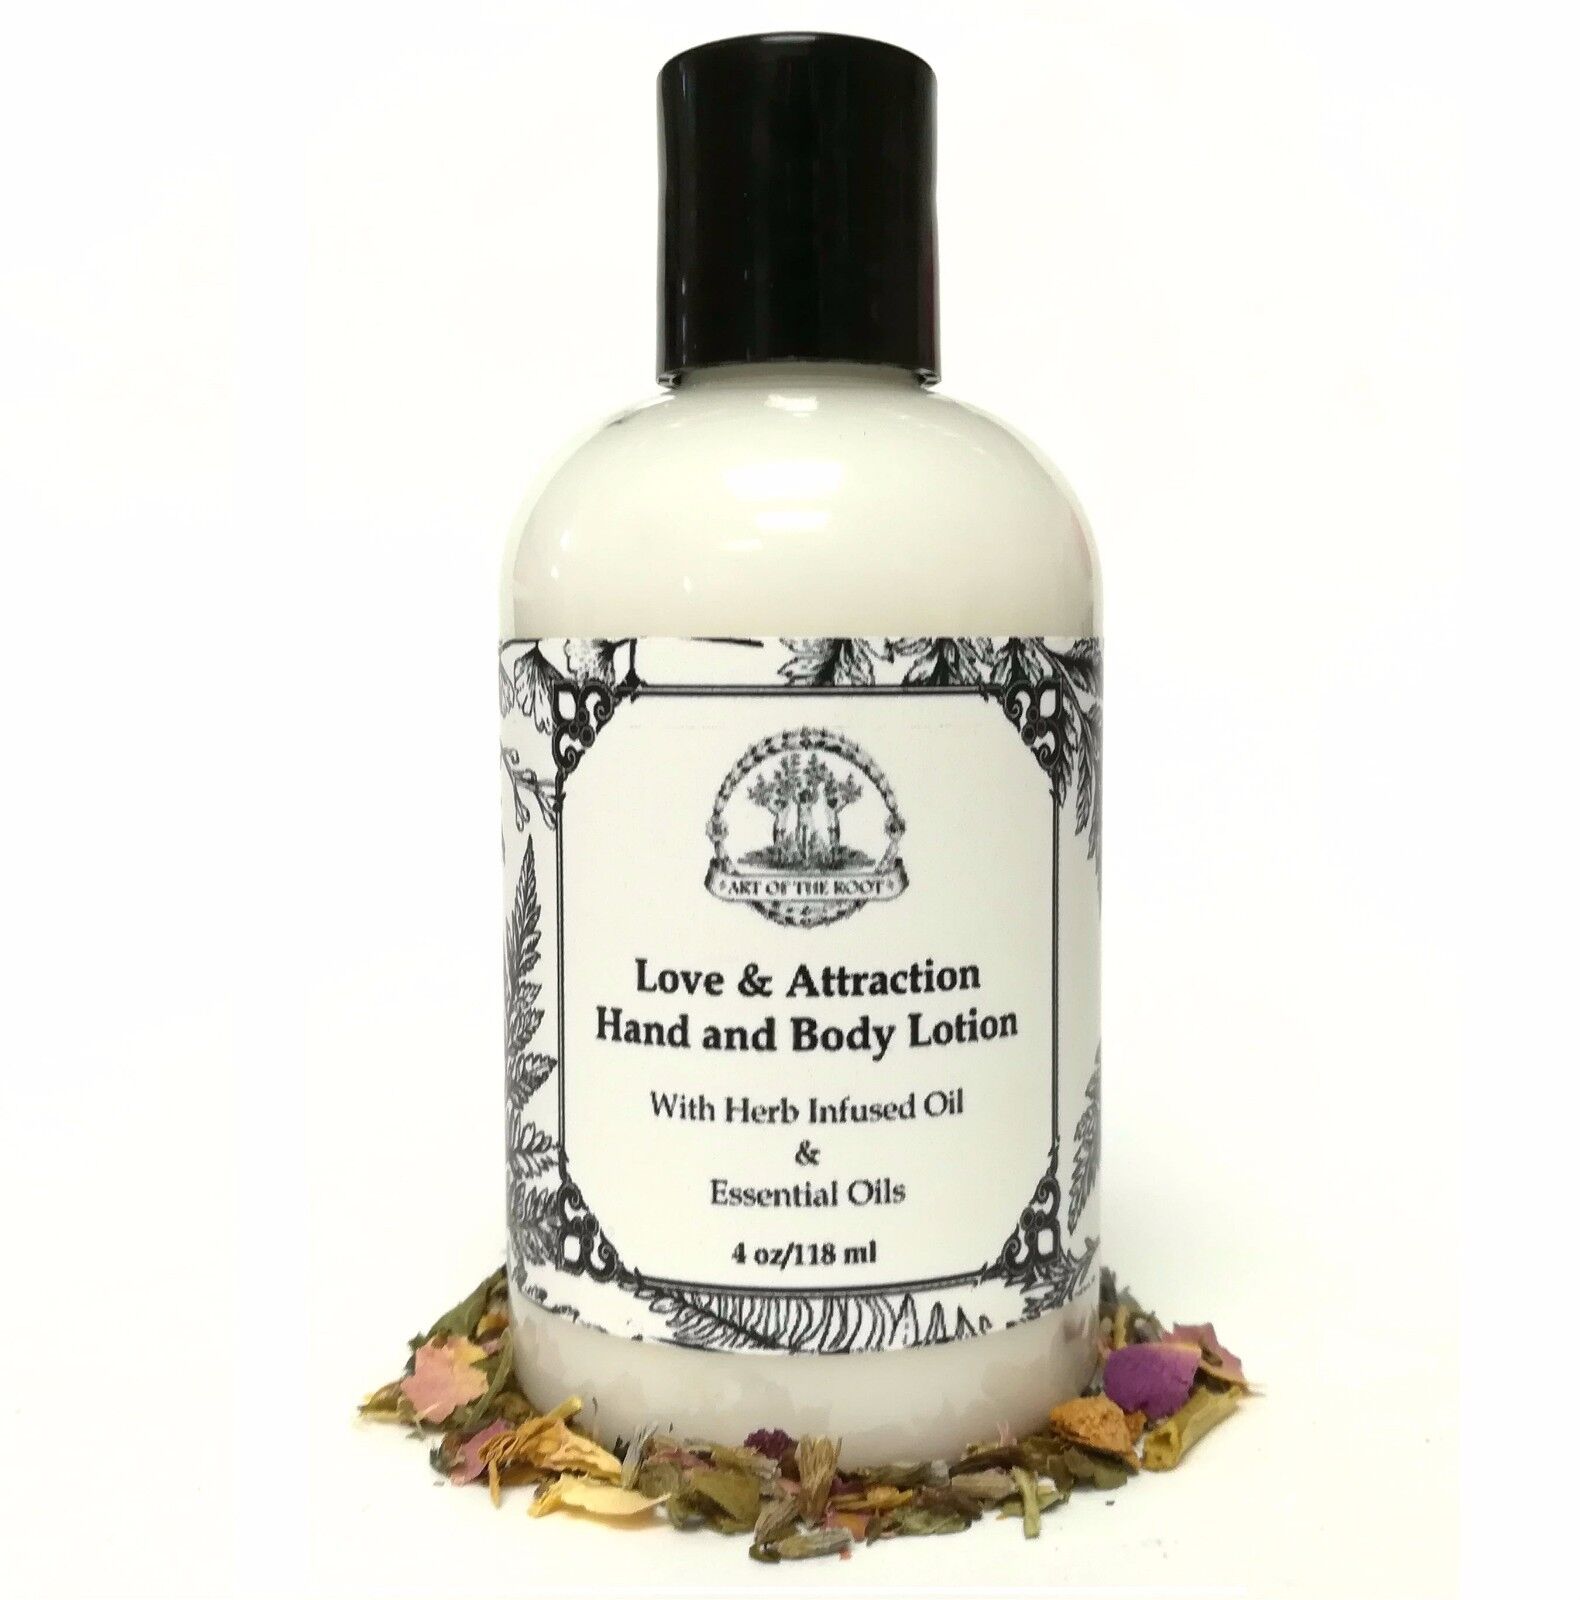 Love & Attraction Lotion Romance Commitment Relationship Hoodoo, Voodoo, Wicca